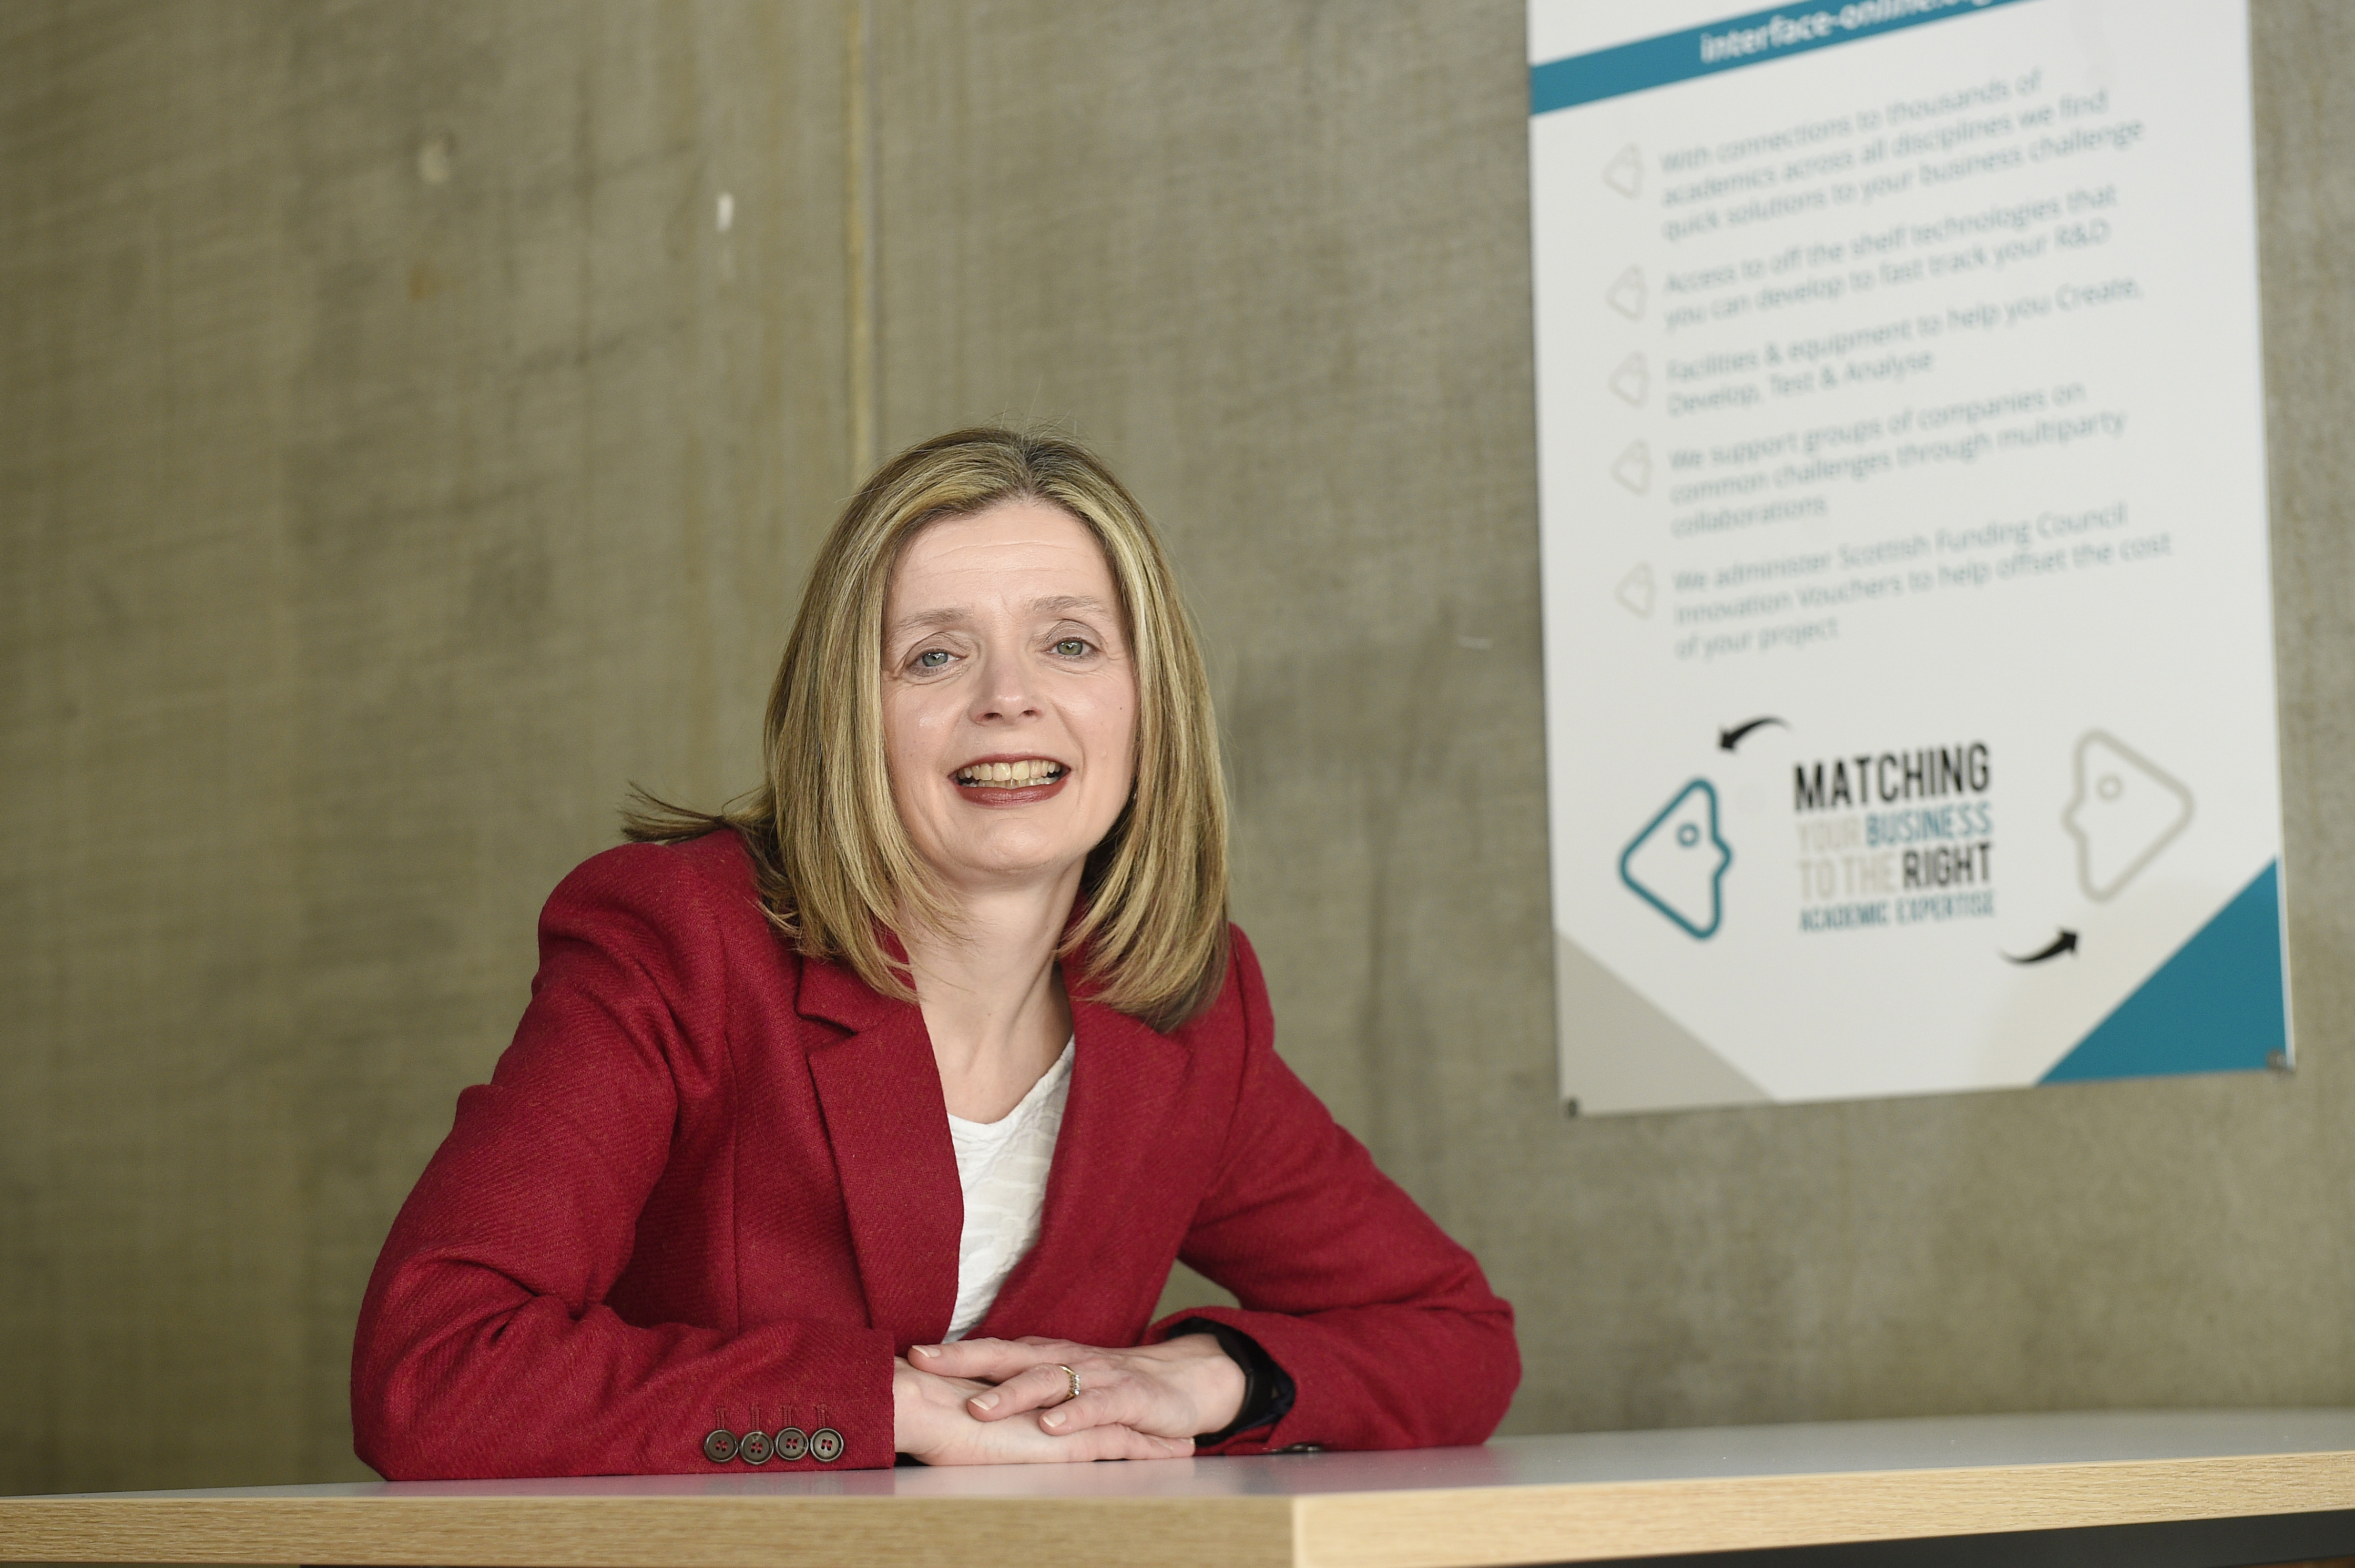 Scottish economy boosted by Interface's business-academic partnership matching service